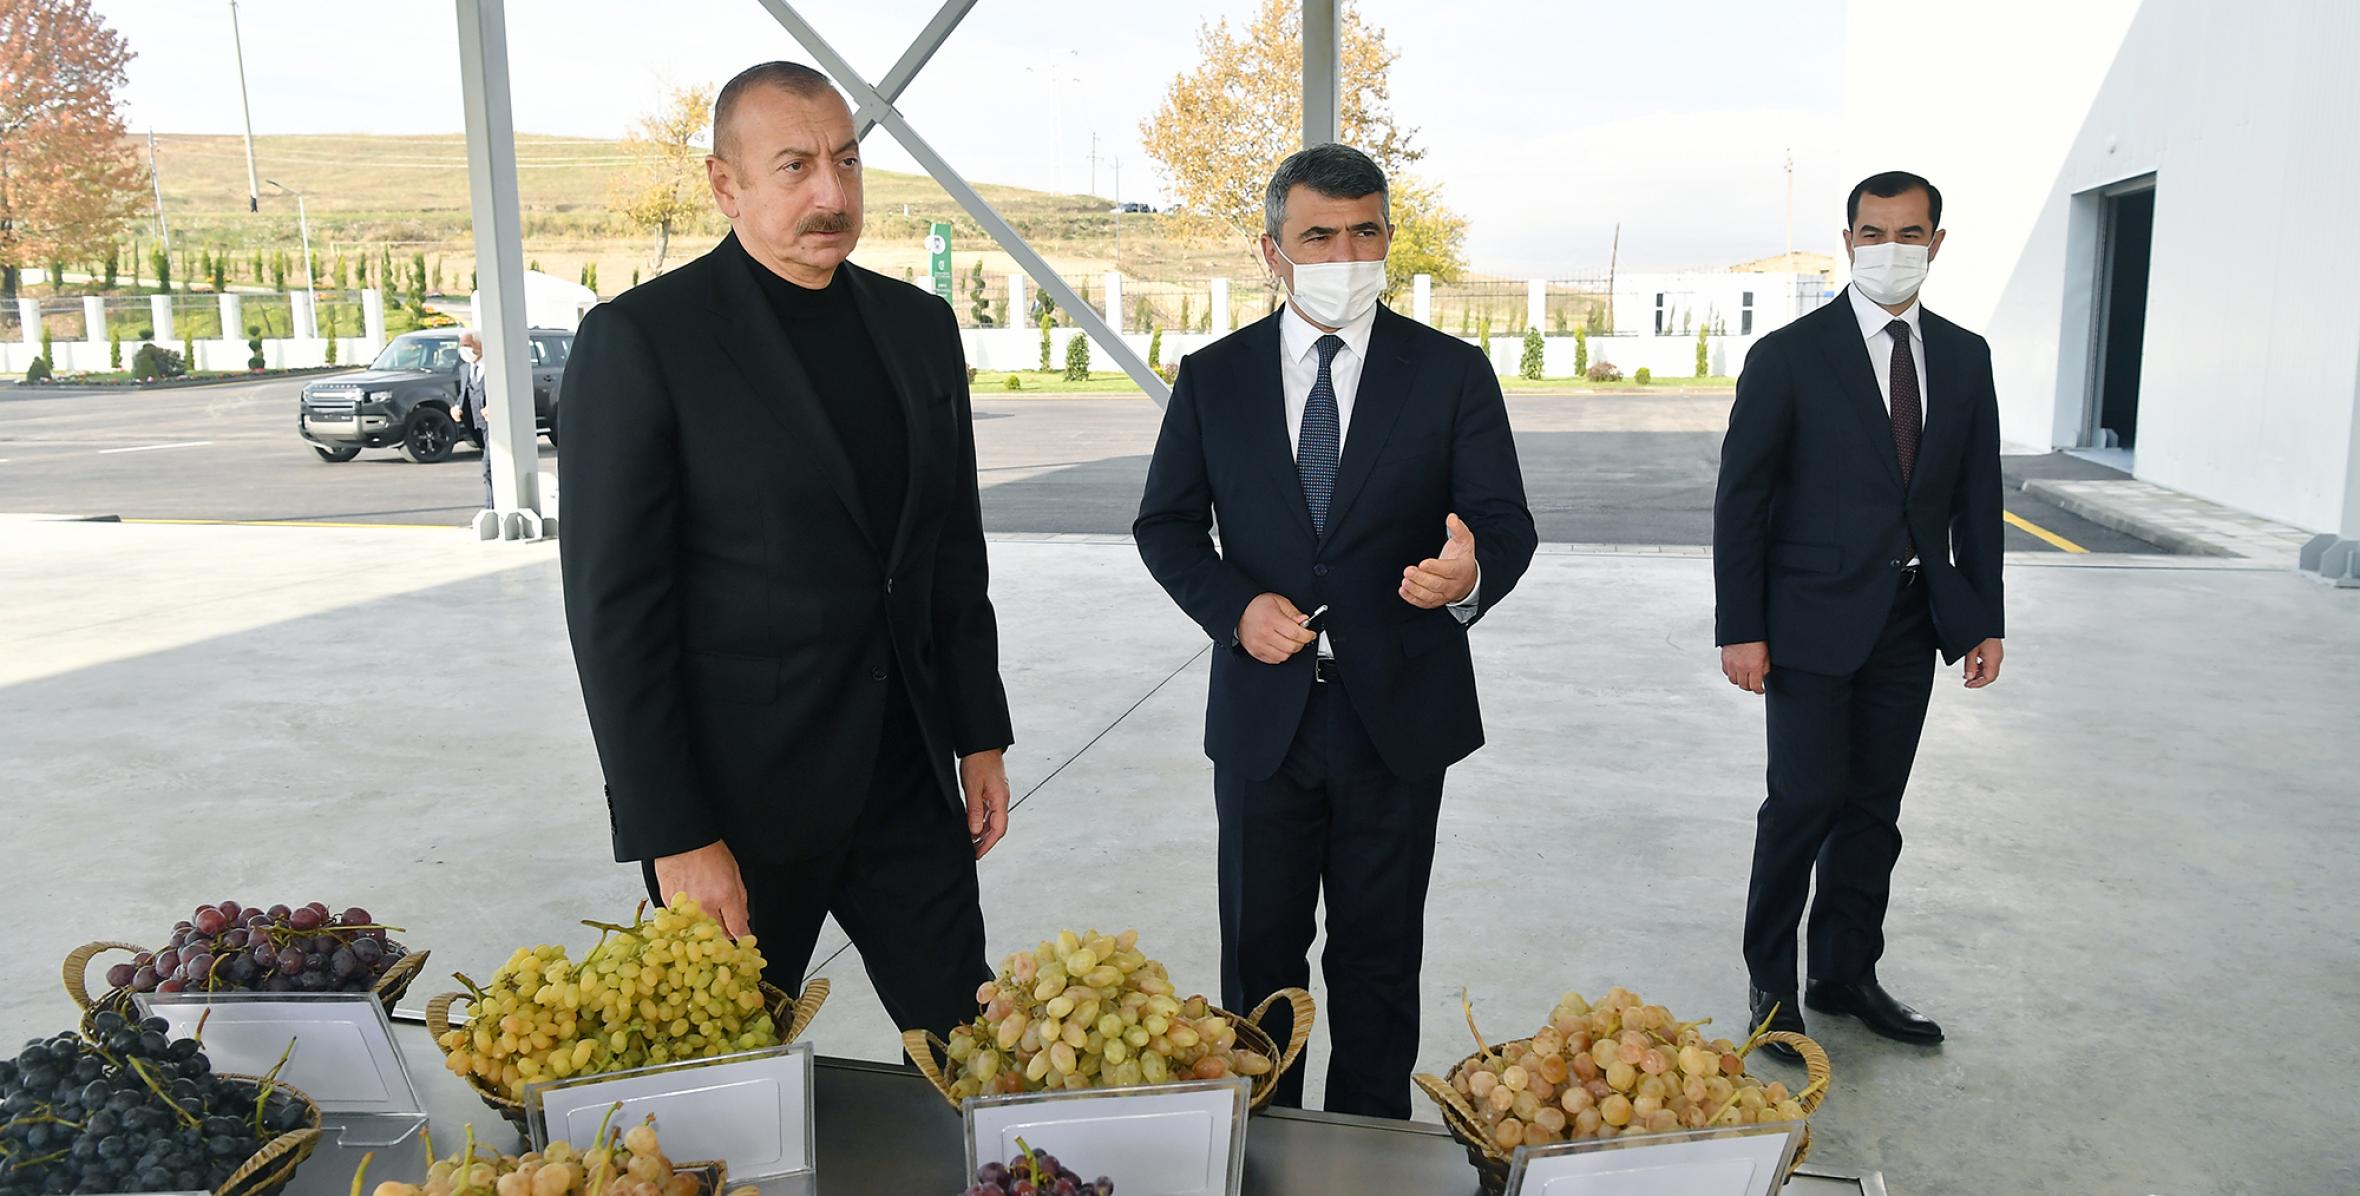 Ilham Aliyev and First Lady Mehriban Aliyeva attended the opening of the Shamakhi Grape Seedling Center